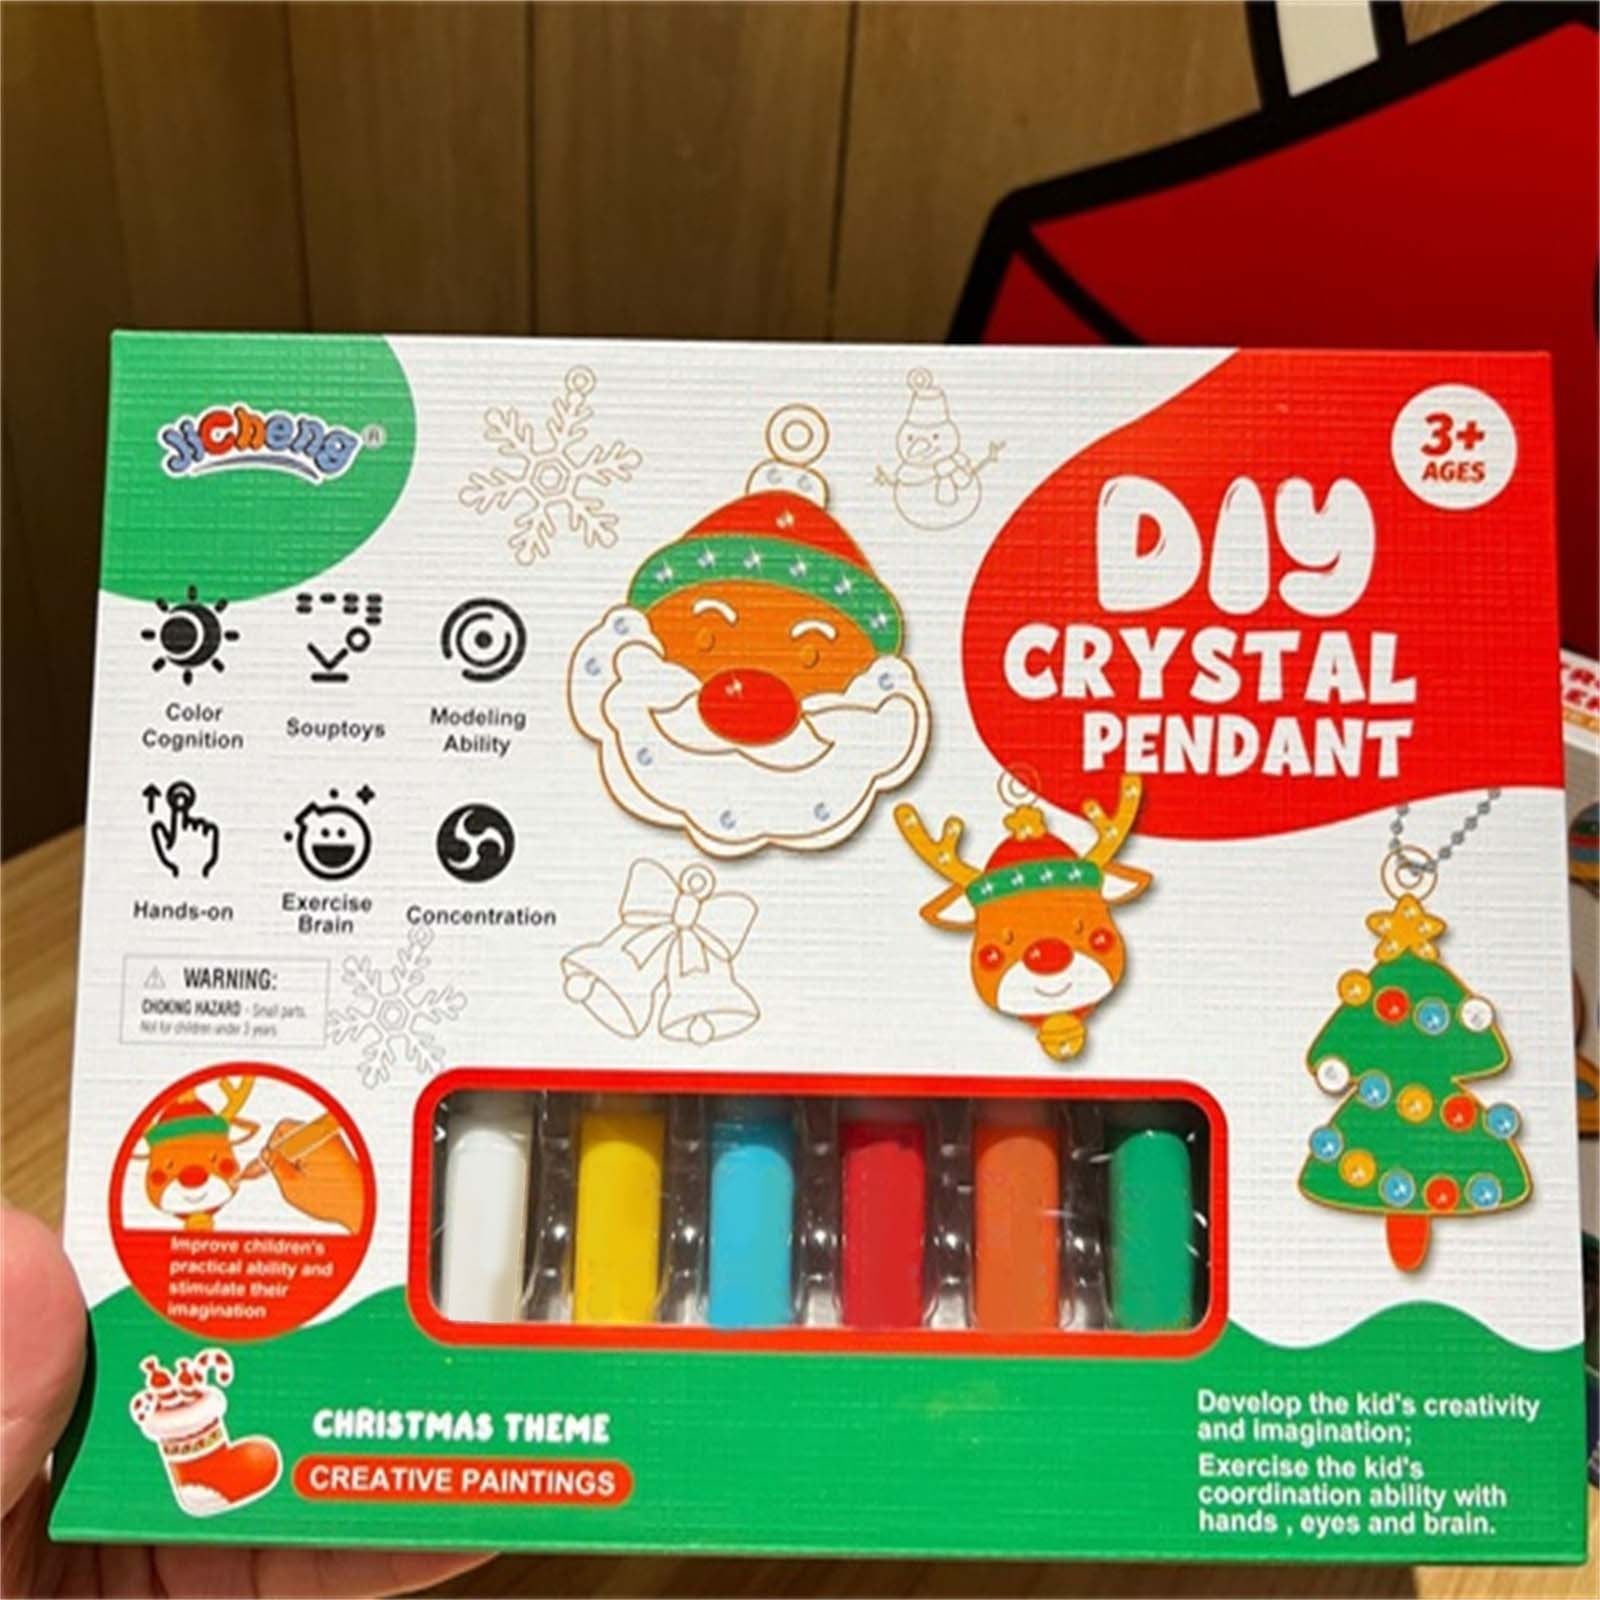  DASHENRAN DIY Crystal Paint Arts and Crafts Set,DIY Window  Paint Art,Diamond Painting Keychains Kit for Girls Crafts,Bake-Free Crystal  Color Glue Painting Pendant Toy,Crystal Pendant Kit (12) : Toys & Games